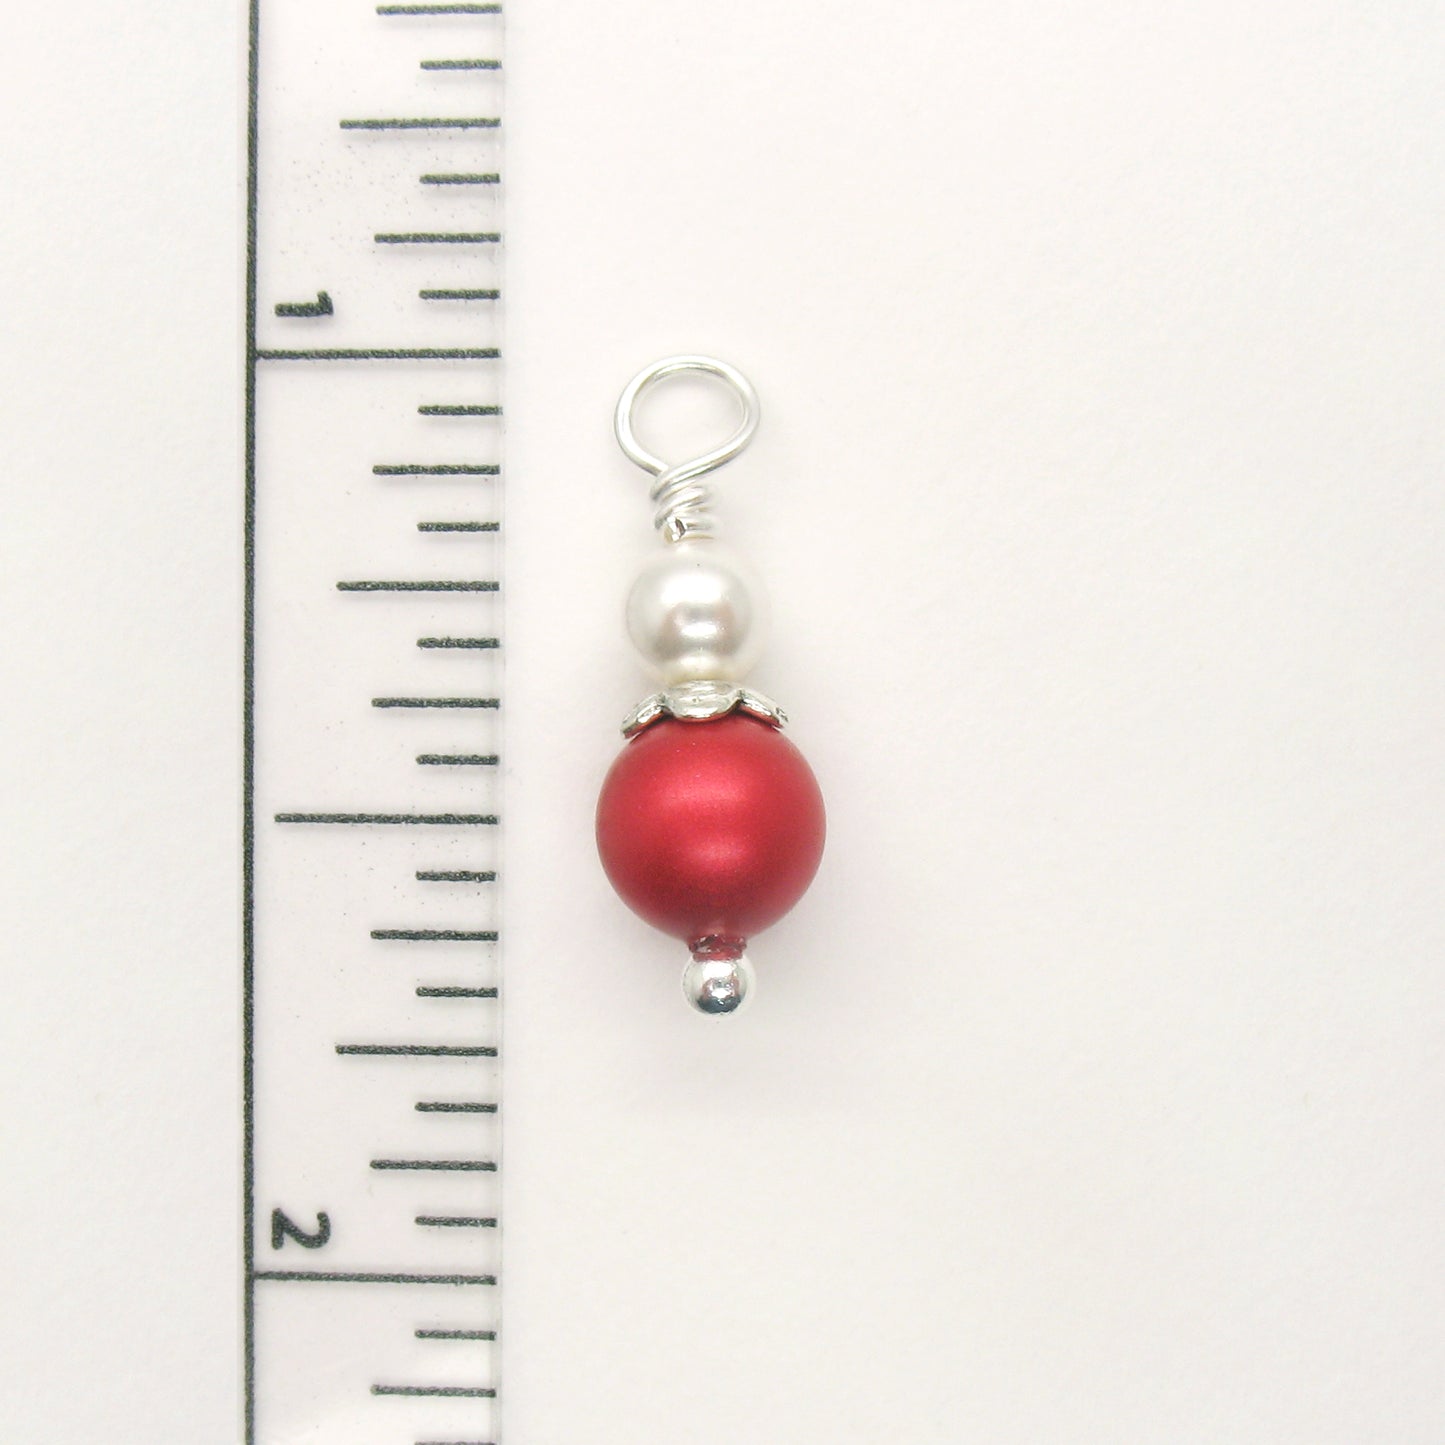 Dangle Charms made with Swarovski Crystals - Coral Red & Pink Pastel Bead Dangles - Adorabilities Charms & Trinkets